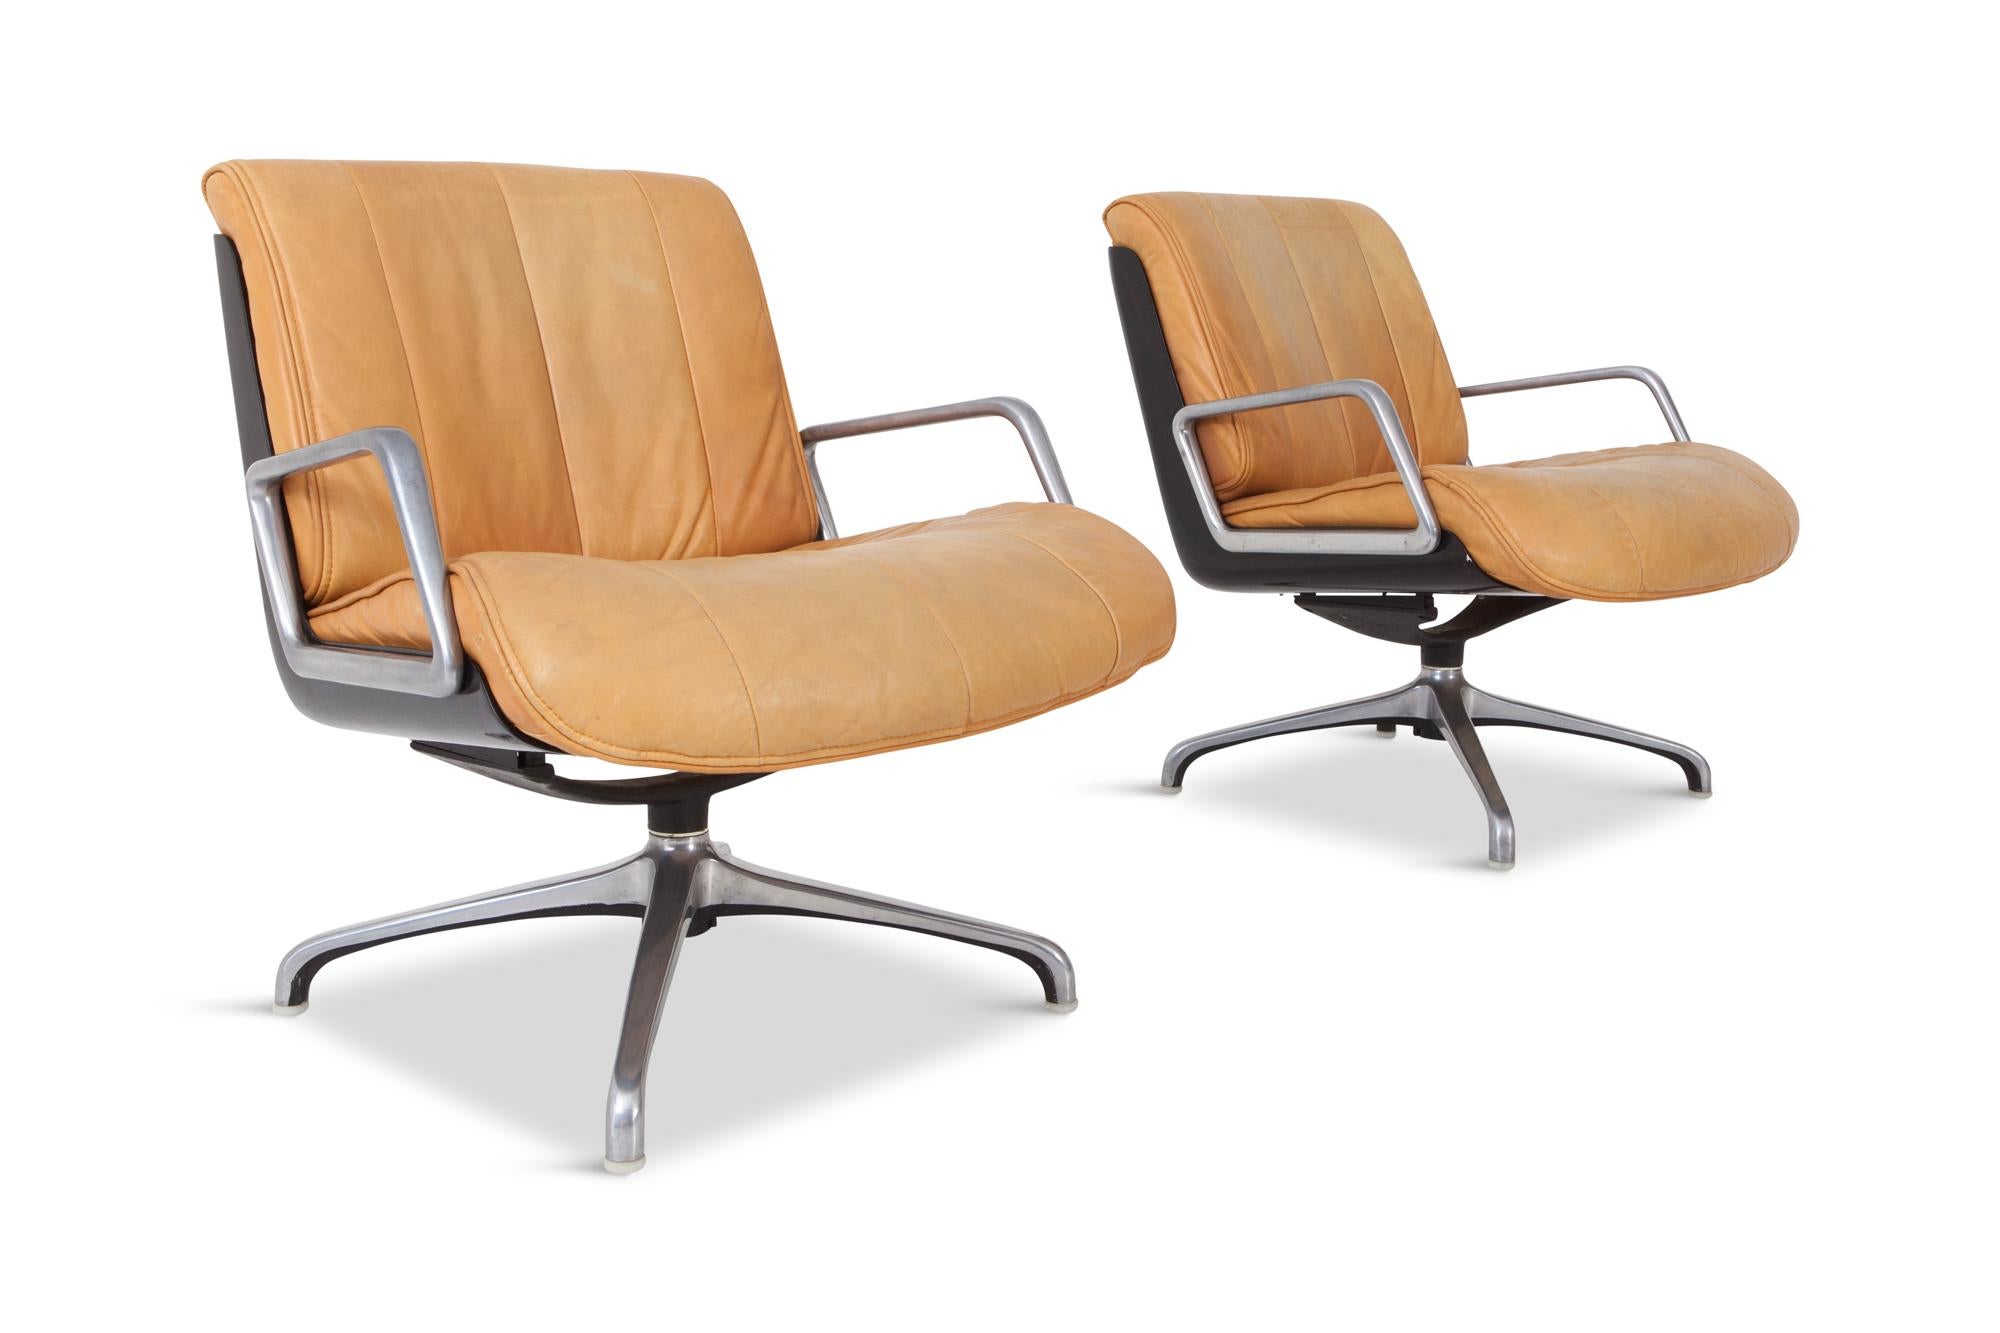 Post-modern swivel Lounge chairs made by Saporiti, Italy,  1970s.

Ideal for a desk space or living room area. 
Nude or camel leather seating, aluminum armrests and base, black plastic back. 
Elegant and top quality design 

Check out our Goldwood